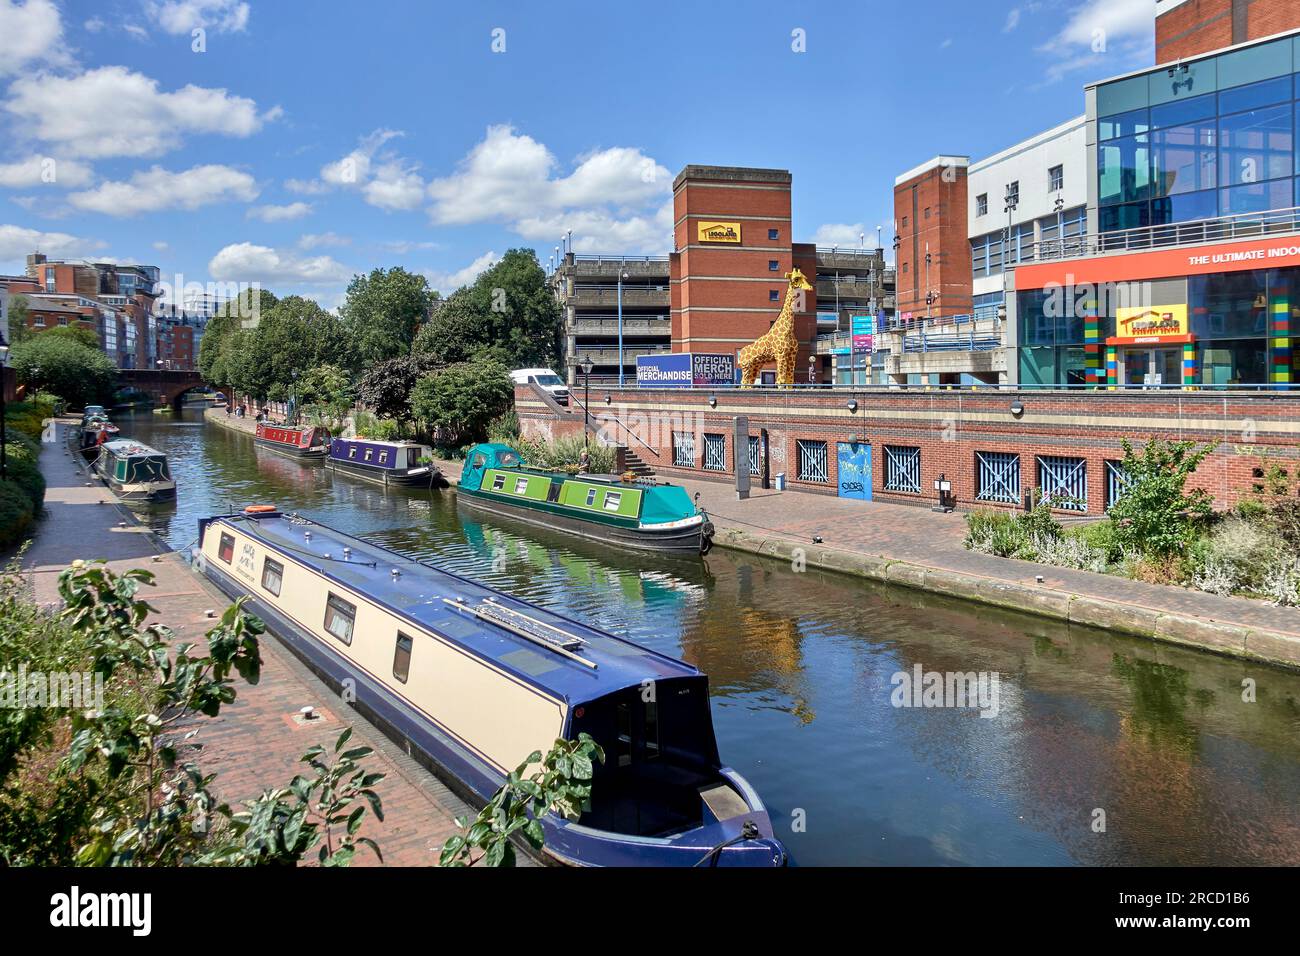 Brindley Place. Canal and narrow boats with Legoland Playground in the distance, Birmingham England UK Stock Photo